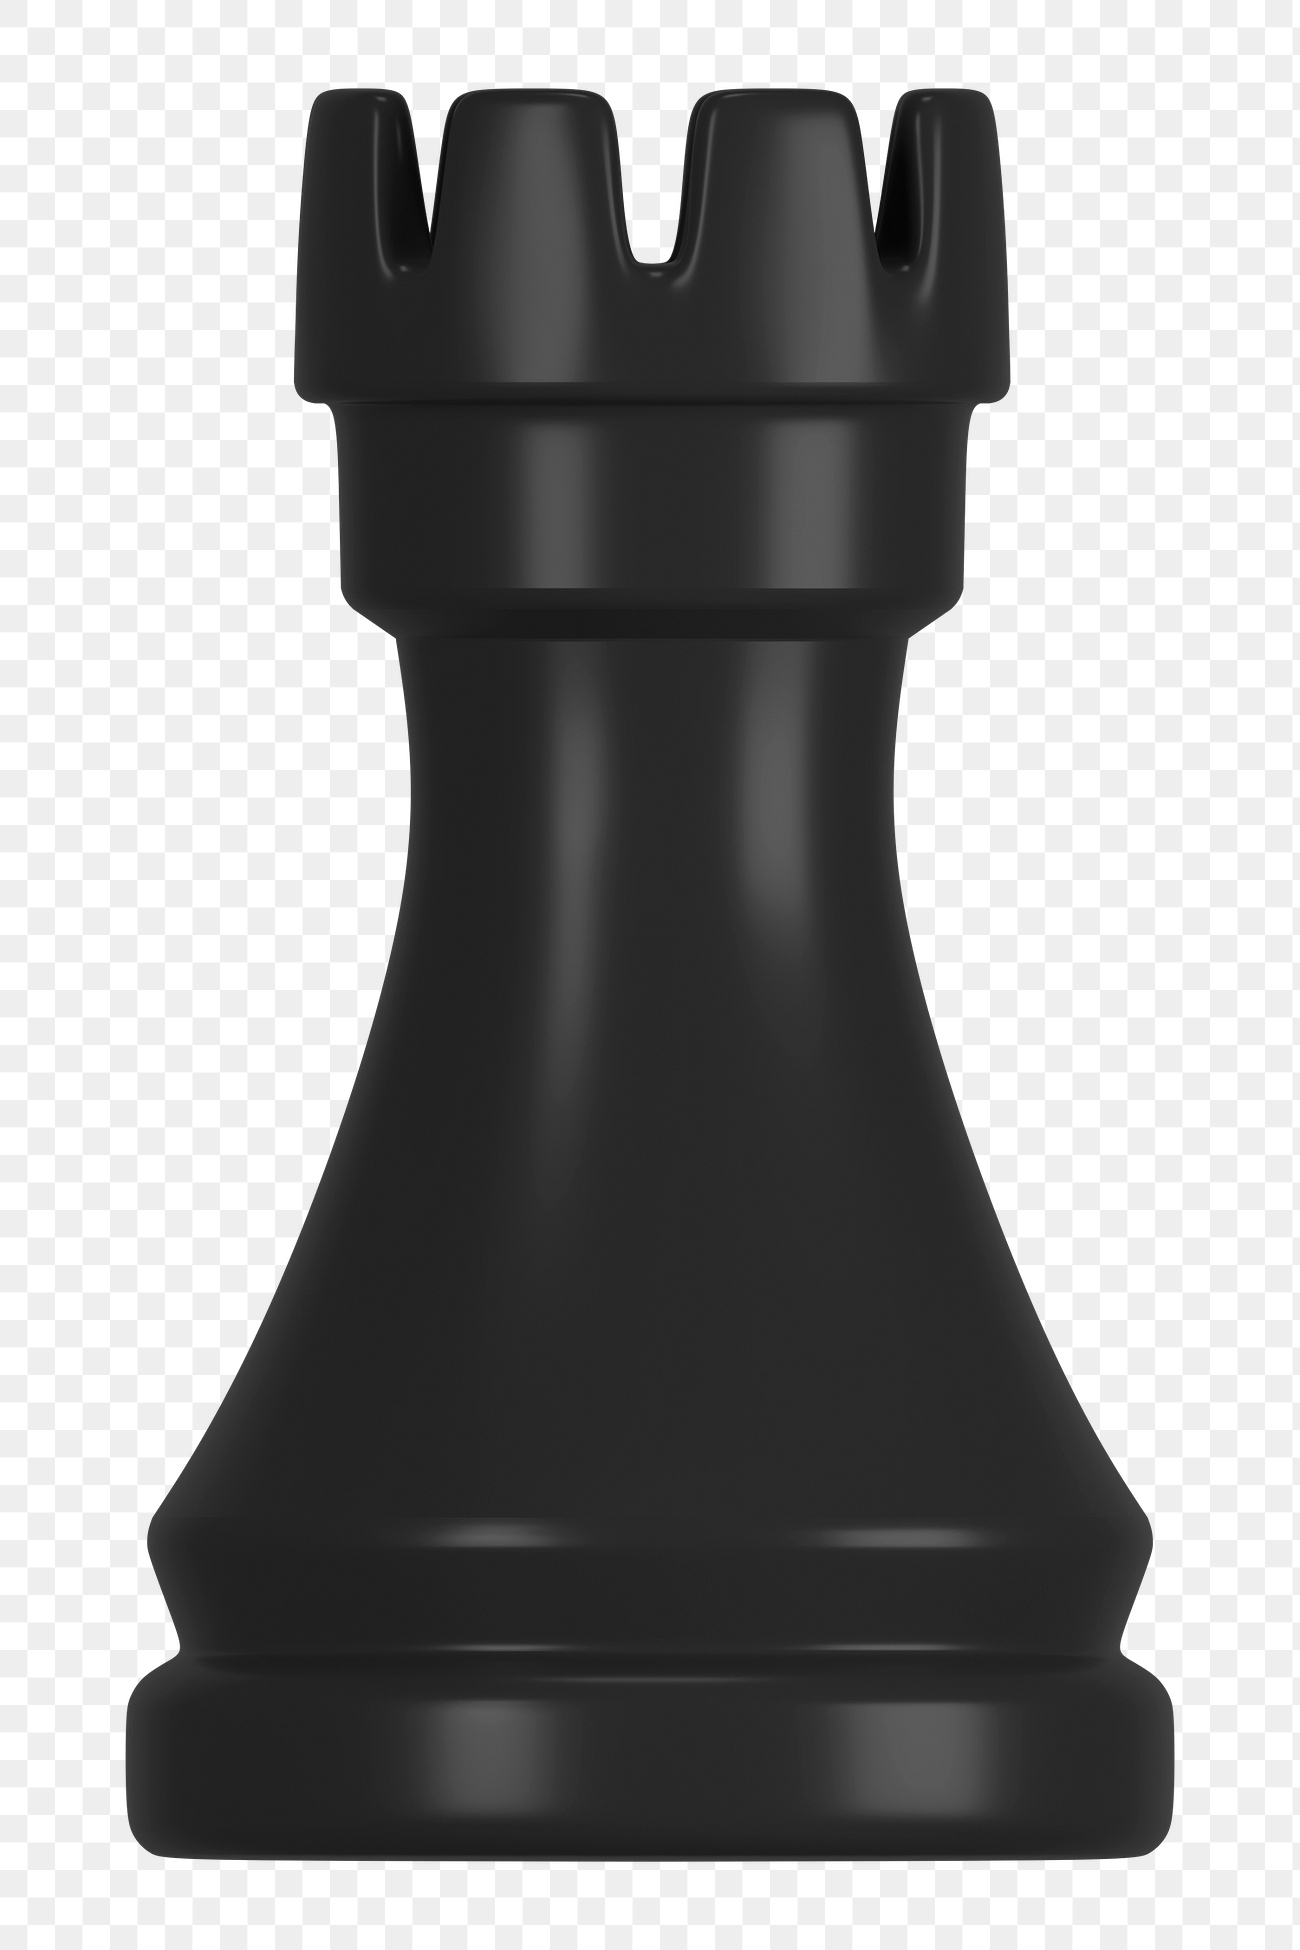 Rook png chess piece clipart, | Premium PNG - rawpixel